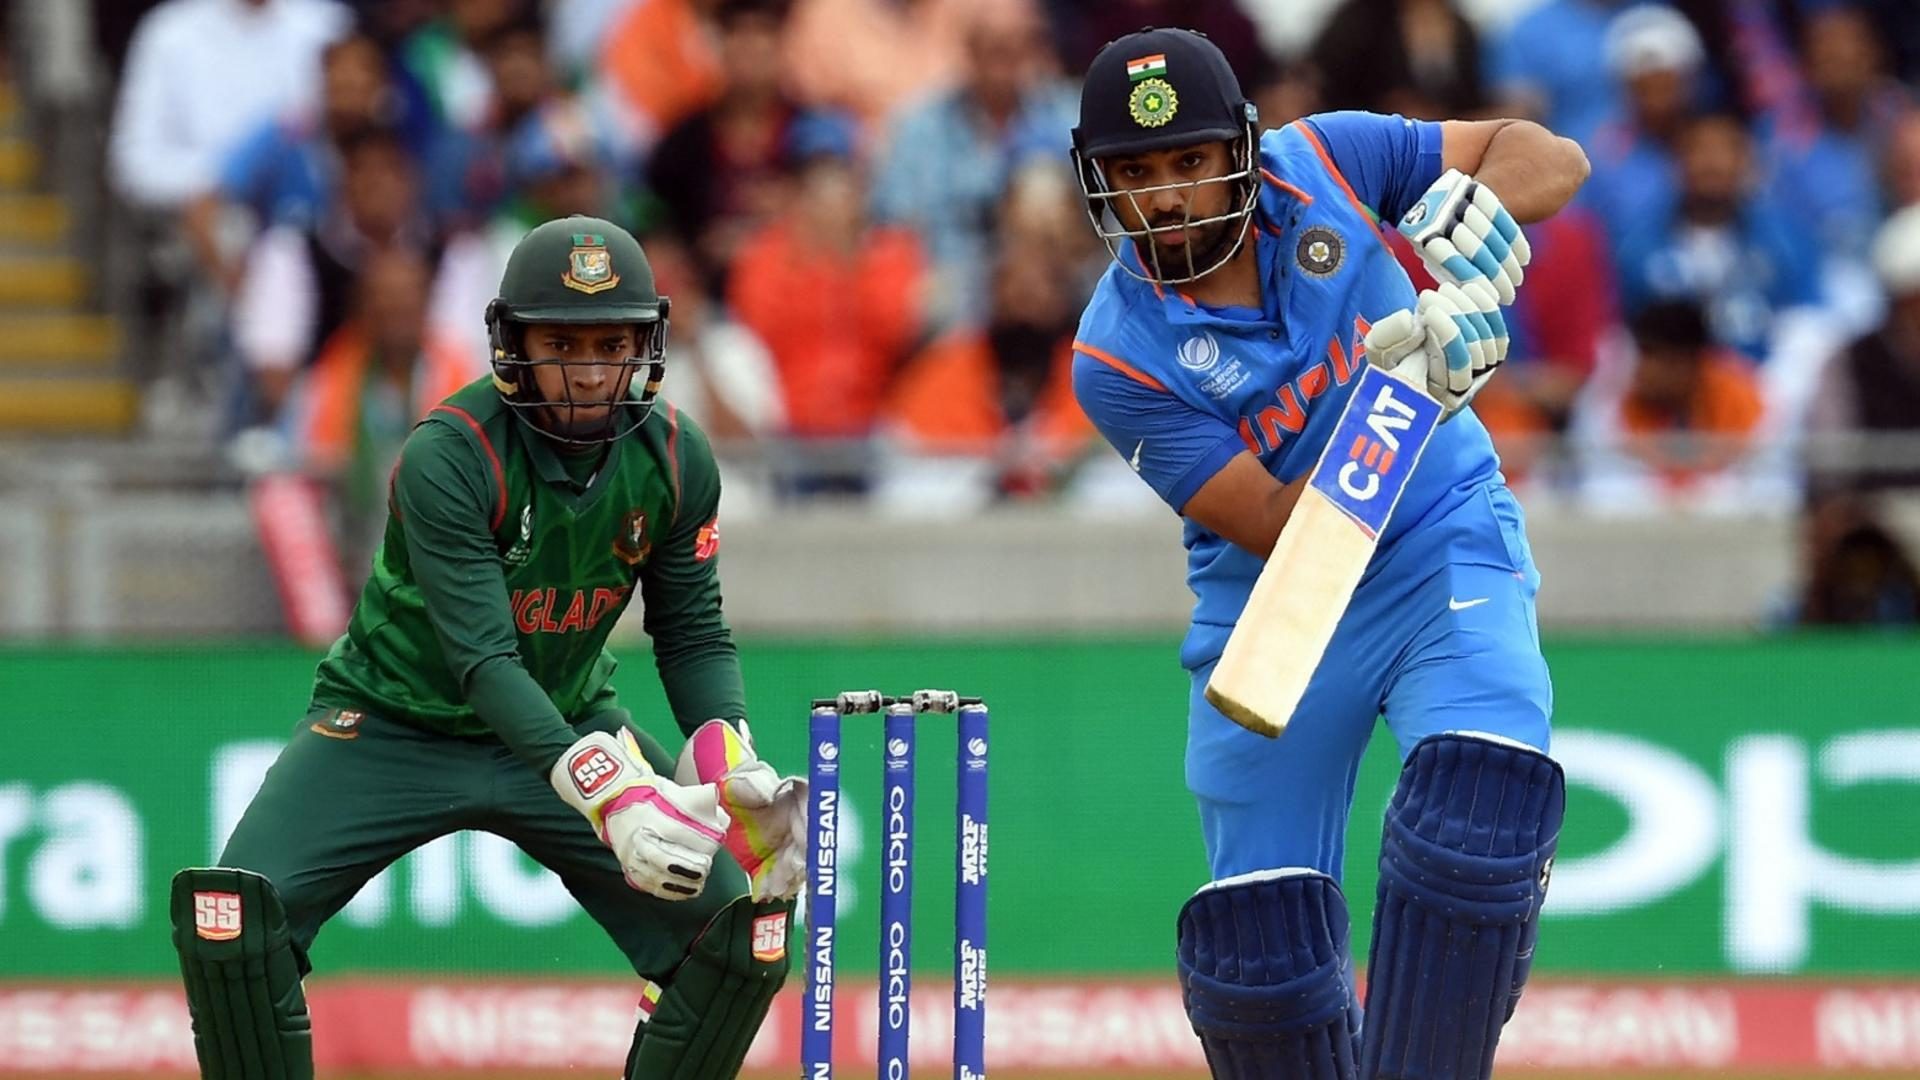 INDIA Vs BANGLADESH MATCH ANALYSIS IN 2022 WORLD CUP T20